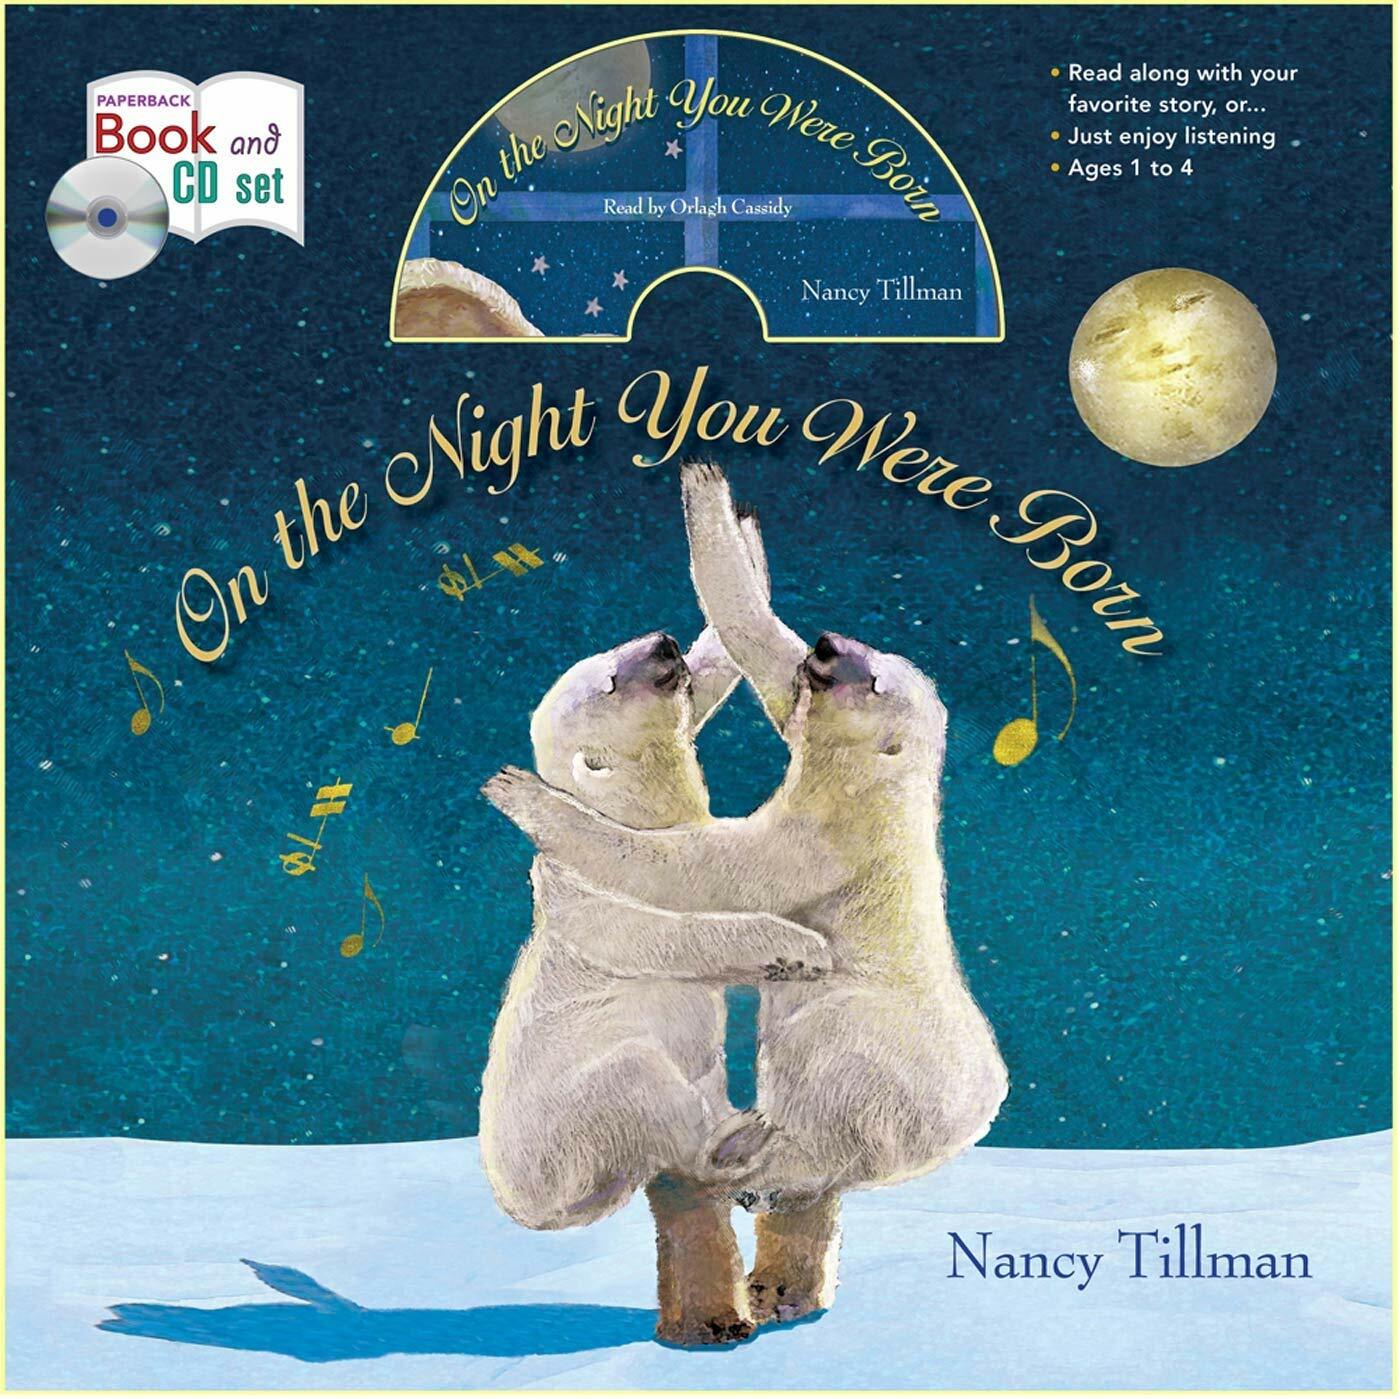 On the Night You Were Born (Paperback + CD)